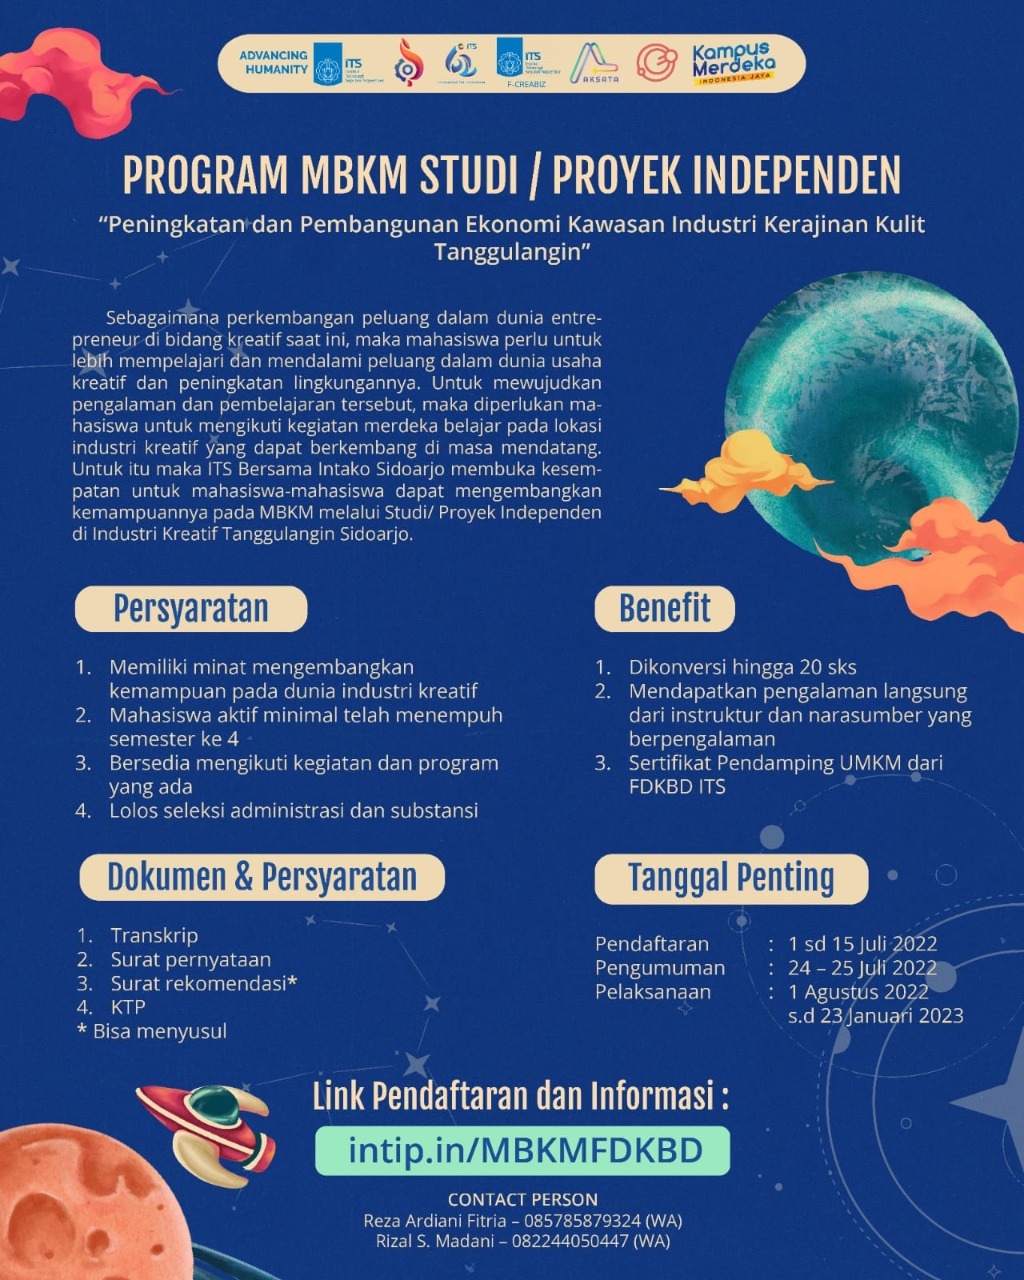 Student Independent Project MBKM Program Poster with Intako